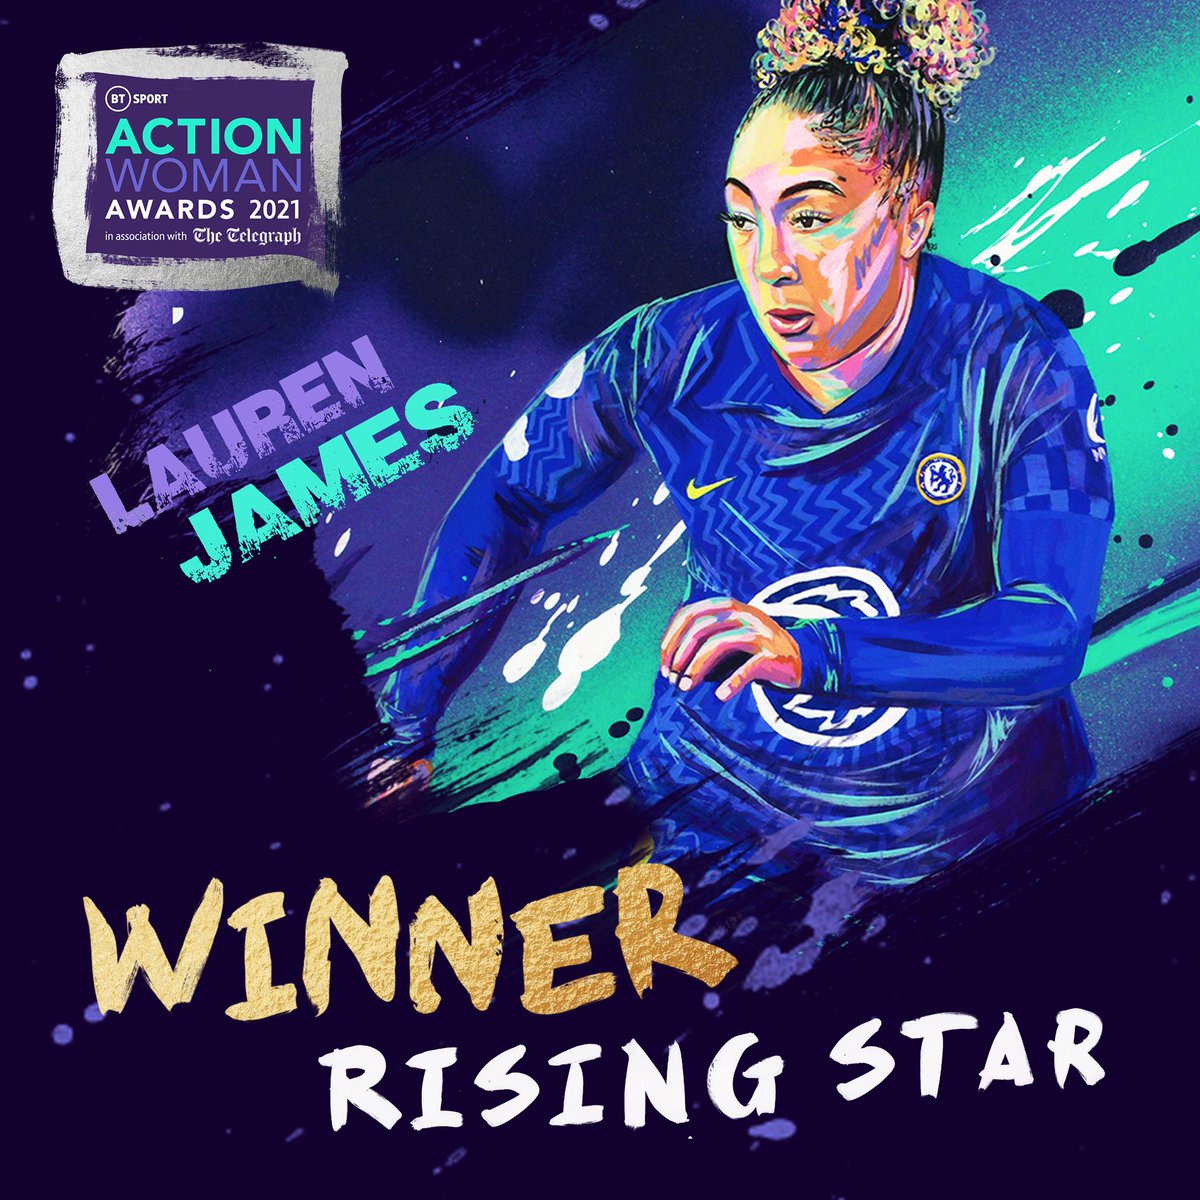 The Blues have been named Team of the Year at @btsport's #ActionWoman Awards 2021 and @LaurenJamess22 has been crowned Rising Star of the Year! 👏⭐️